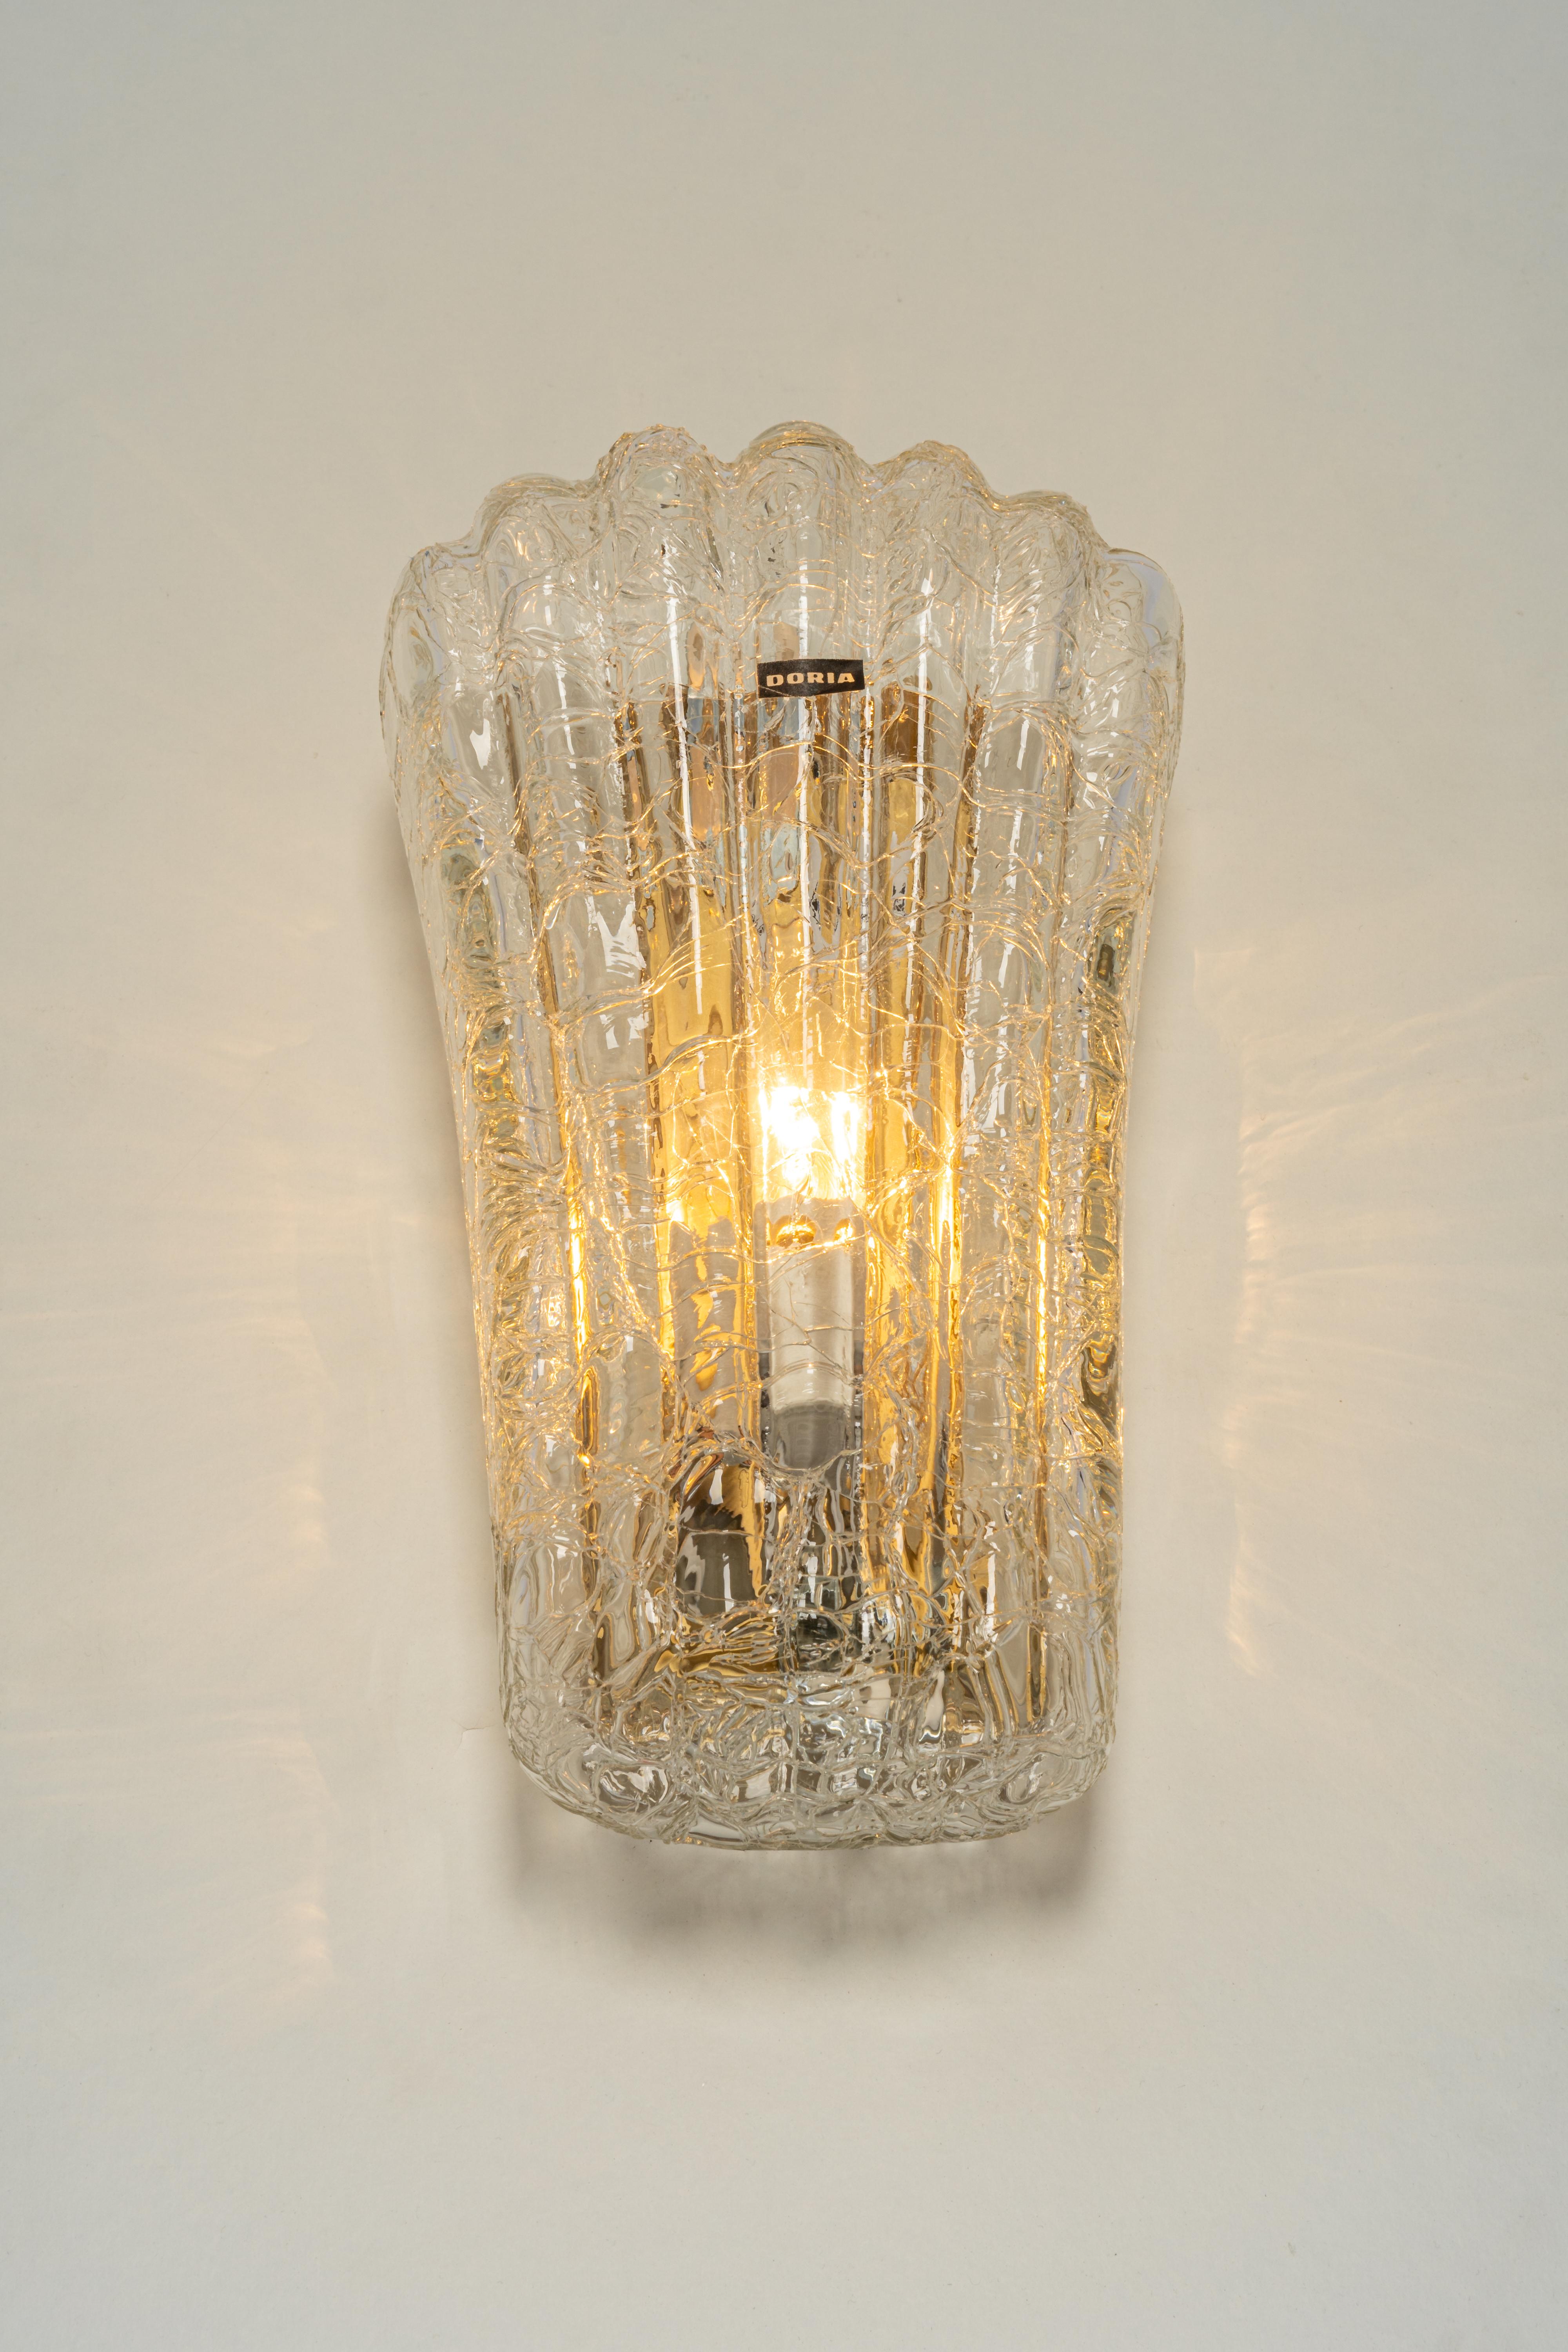 Metal Pair of Murano Glass Wall Sconces by Doria, Germany, 1960s For Sale